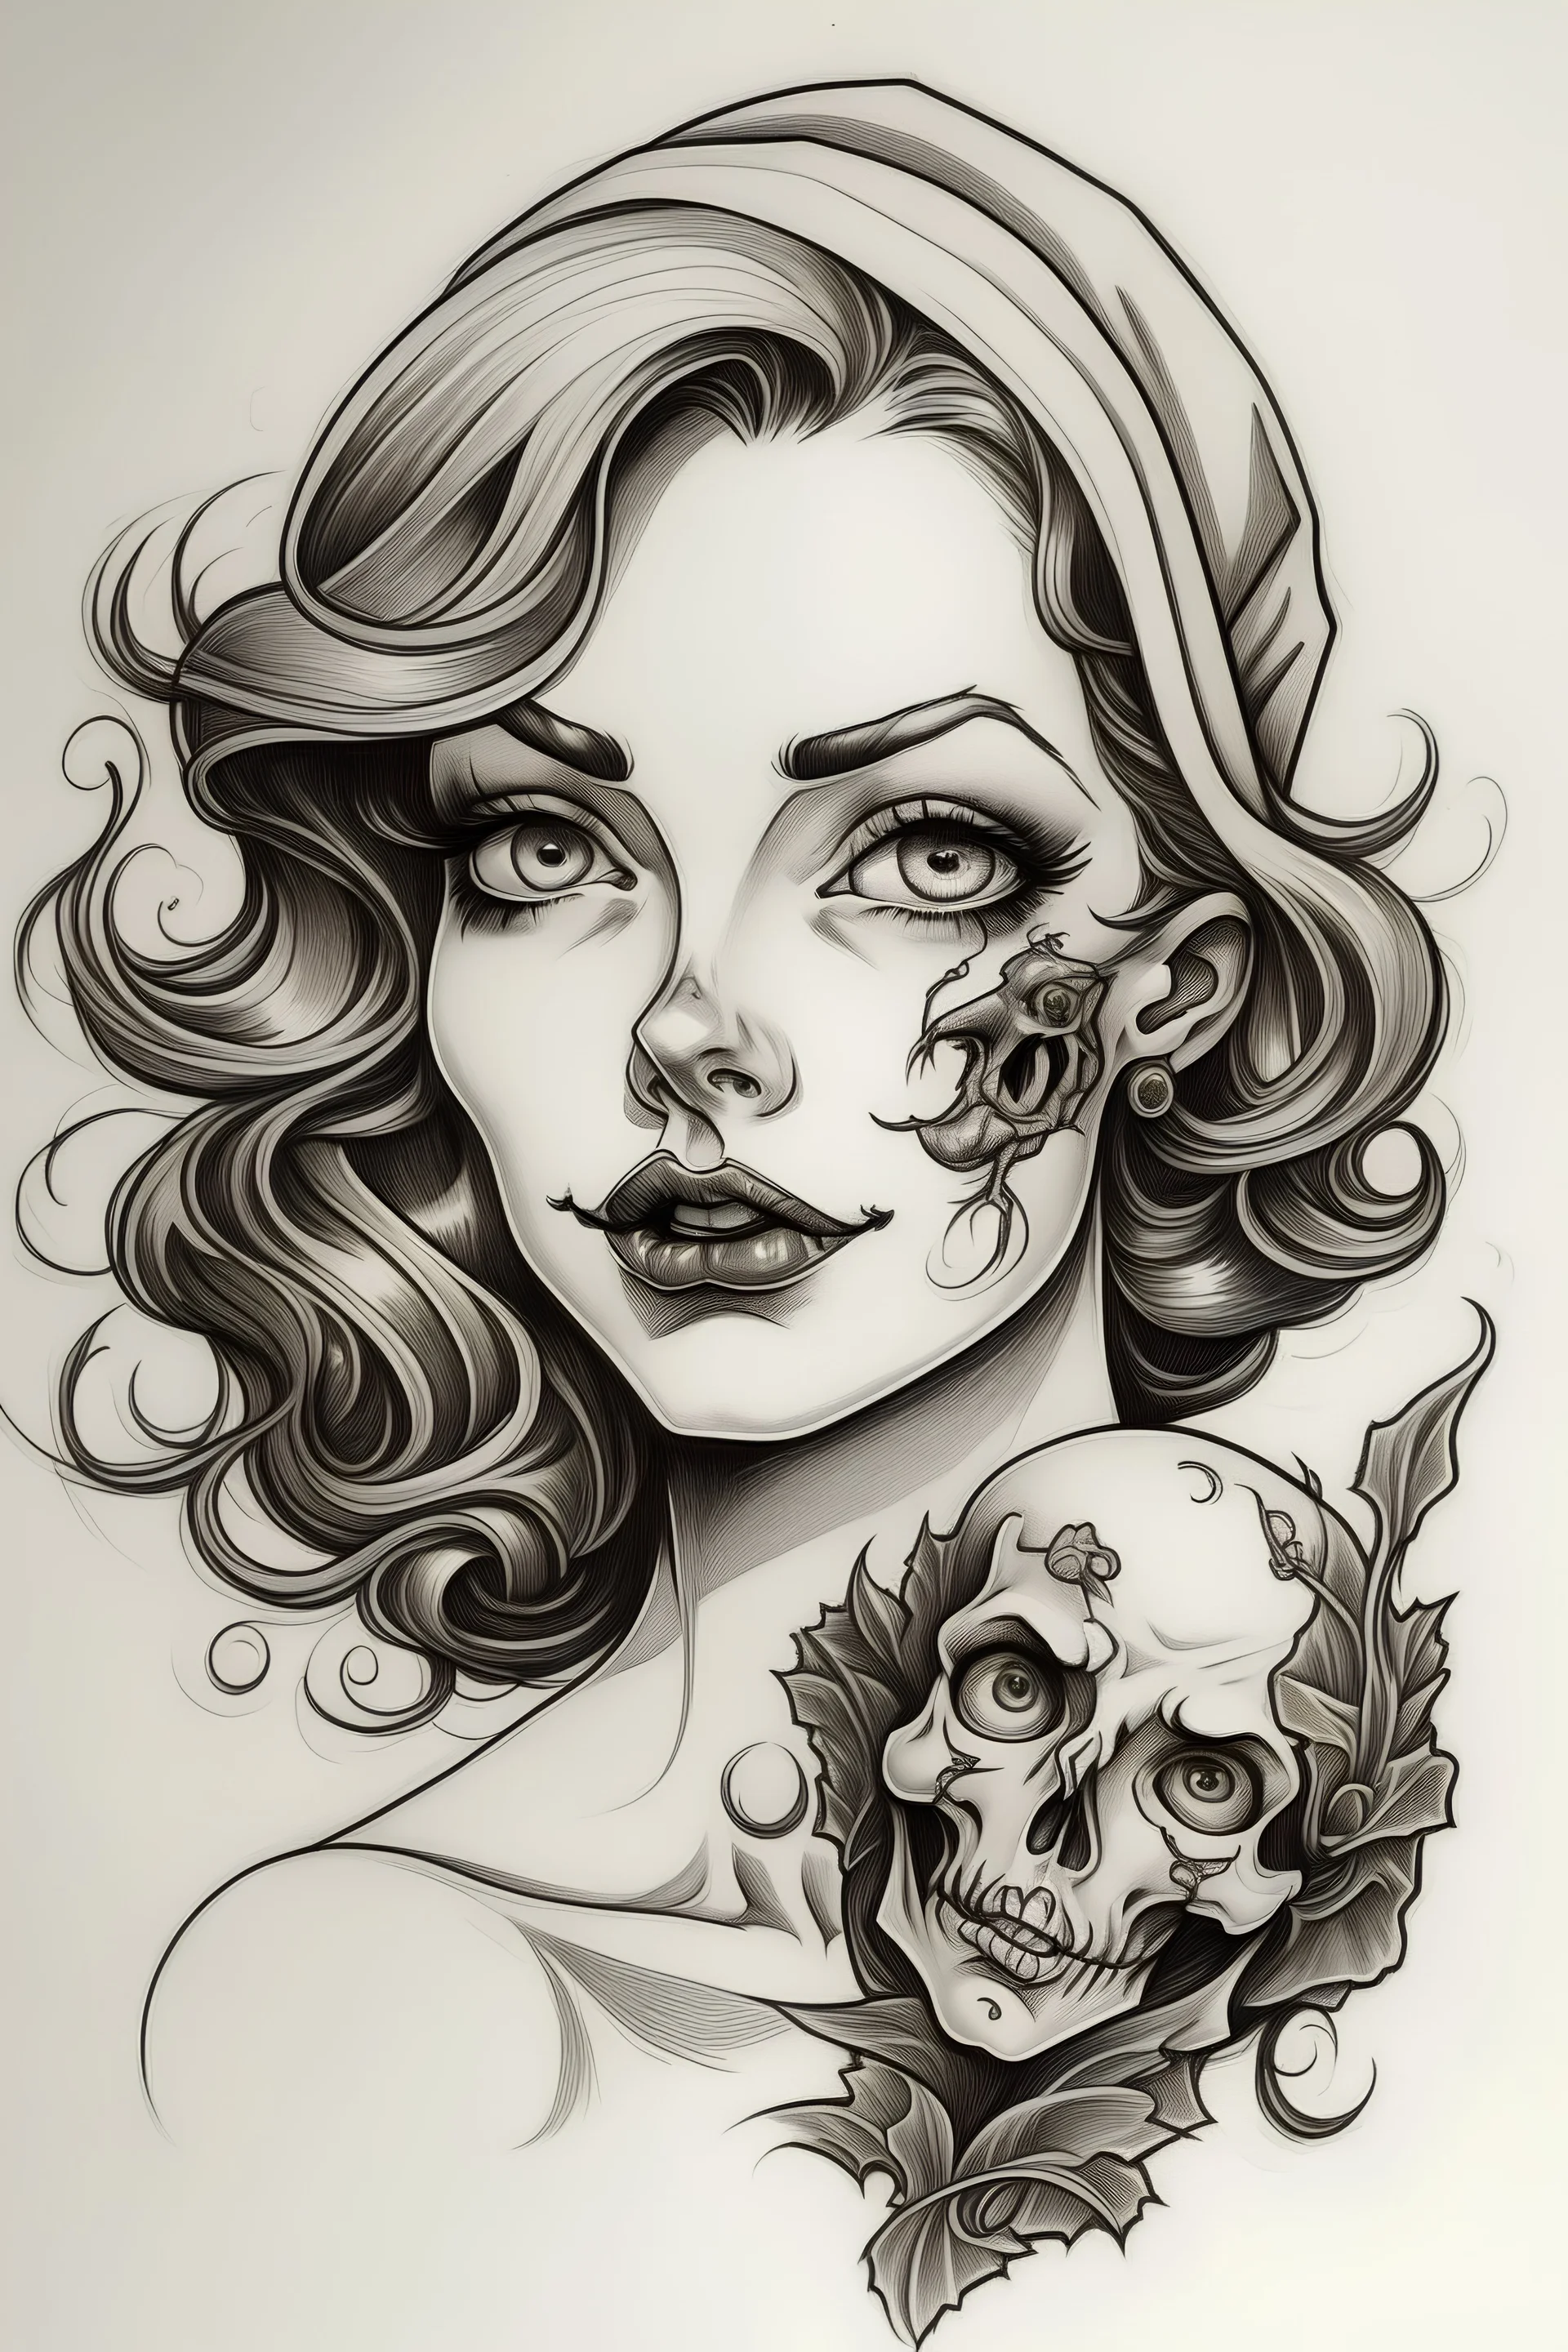 Woman with pretty face holding severed head Tattoo design